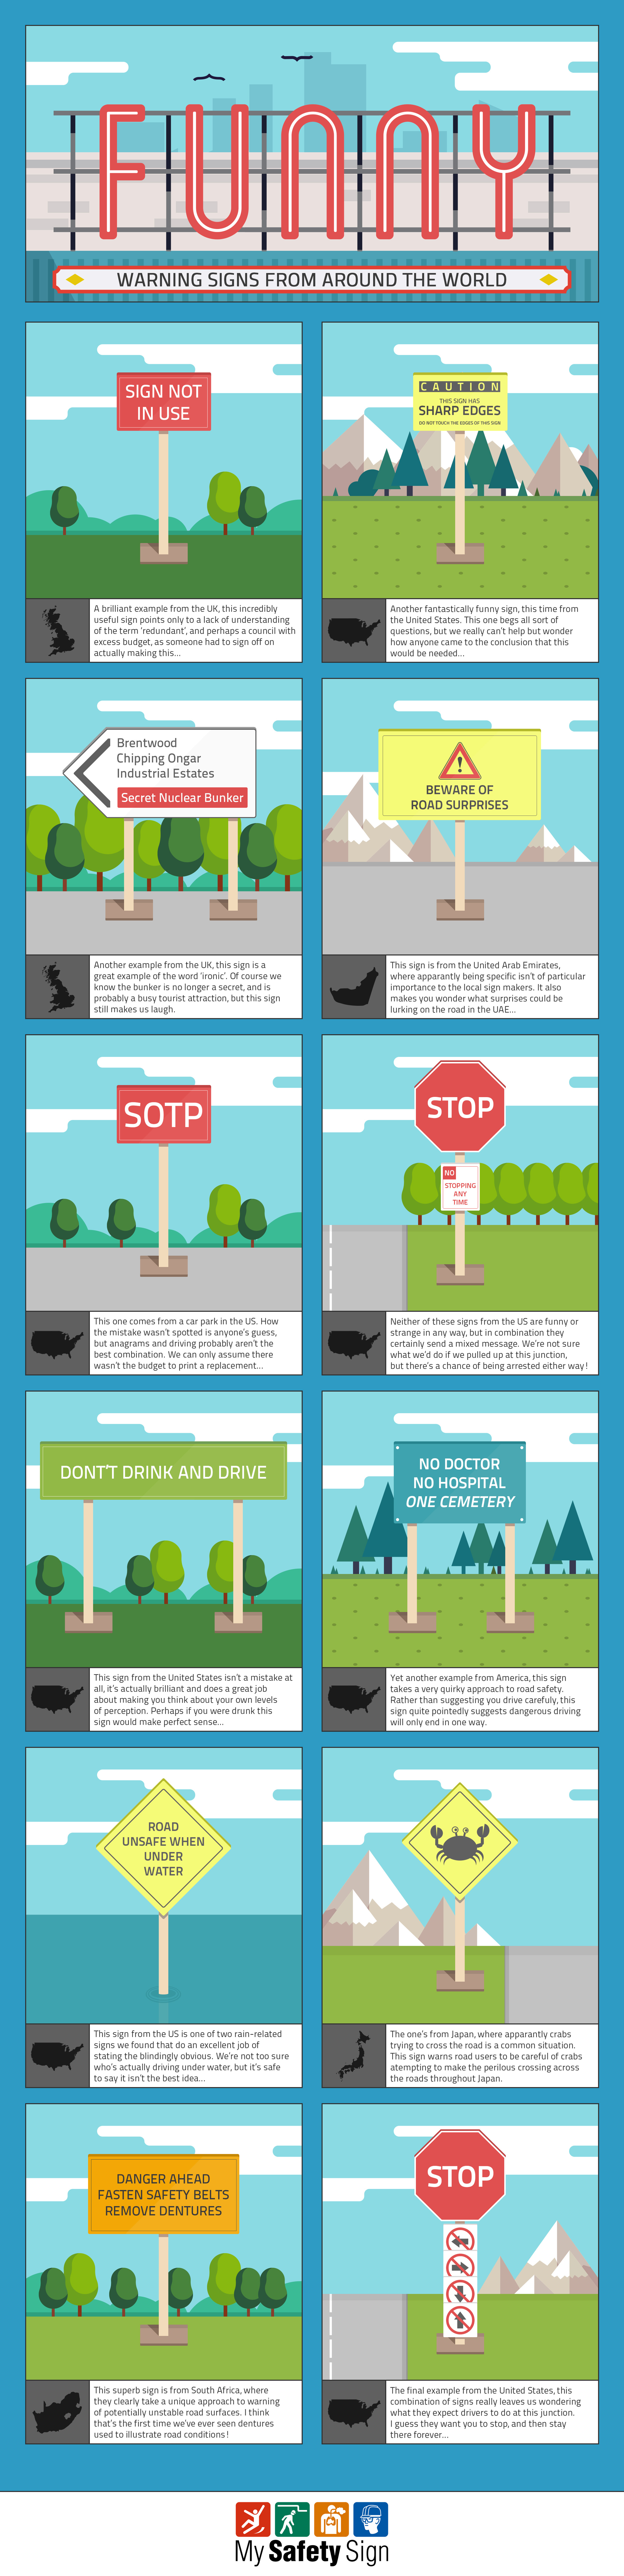 funny-warning-and-safety-signs-infographic